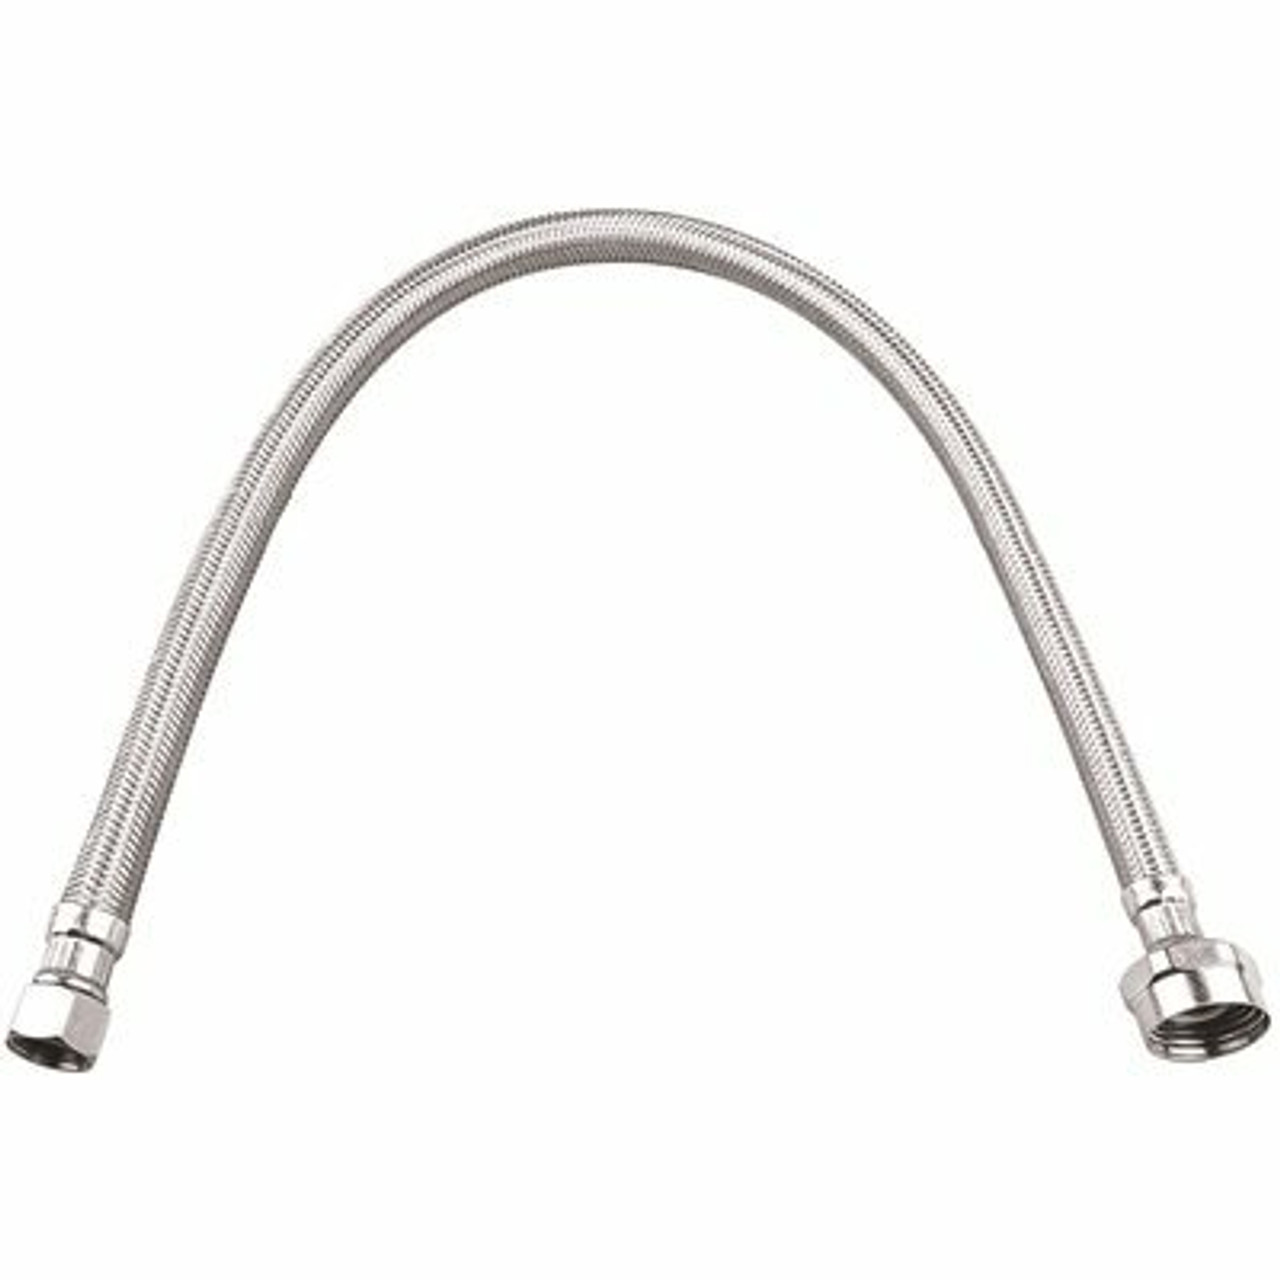 Durapro 3/8 In. Compression X 7/8 In. Metal Ballcock X 20 In. Braided Stainless Steel Toilet Connector